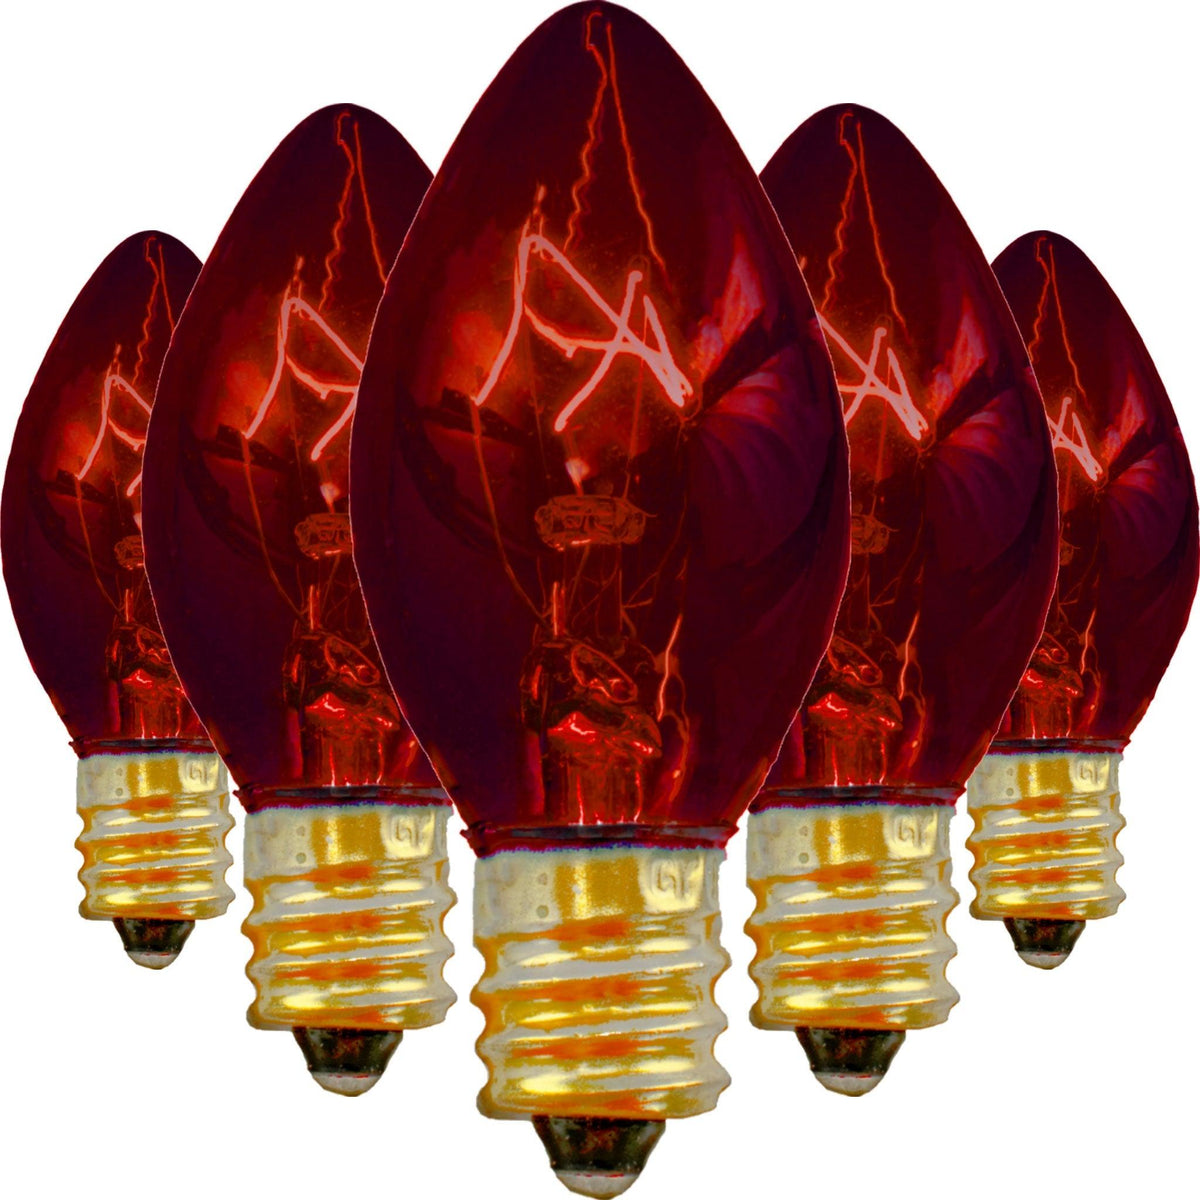 25FT C7/C9 Candelabra Style Red Outdoor String Light Bulb Sets sold by Lee Display.com